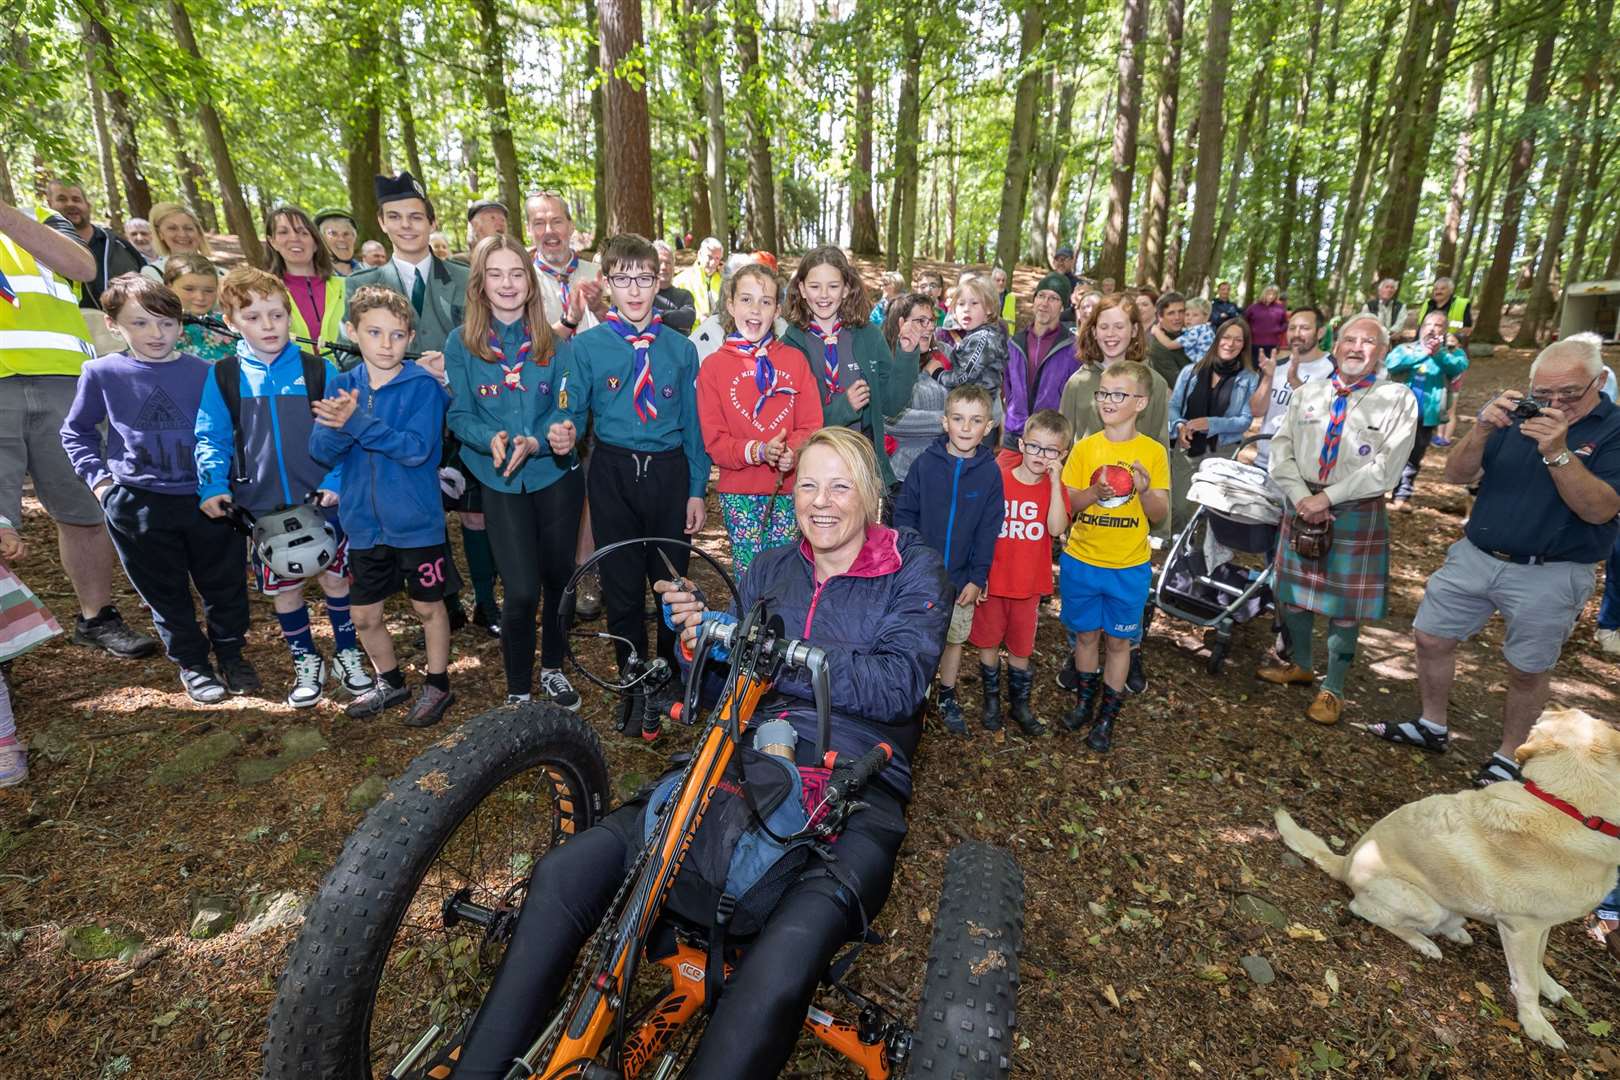 Culduthel Woods Group in Inverness, a local charity, hosted their first woodland gathering as part of the Highland Climate Festival, to mark its ownership success. Karen Darke, British paralympic cyclist and Gold medallist cut the ribbon to officialy open the woods.